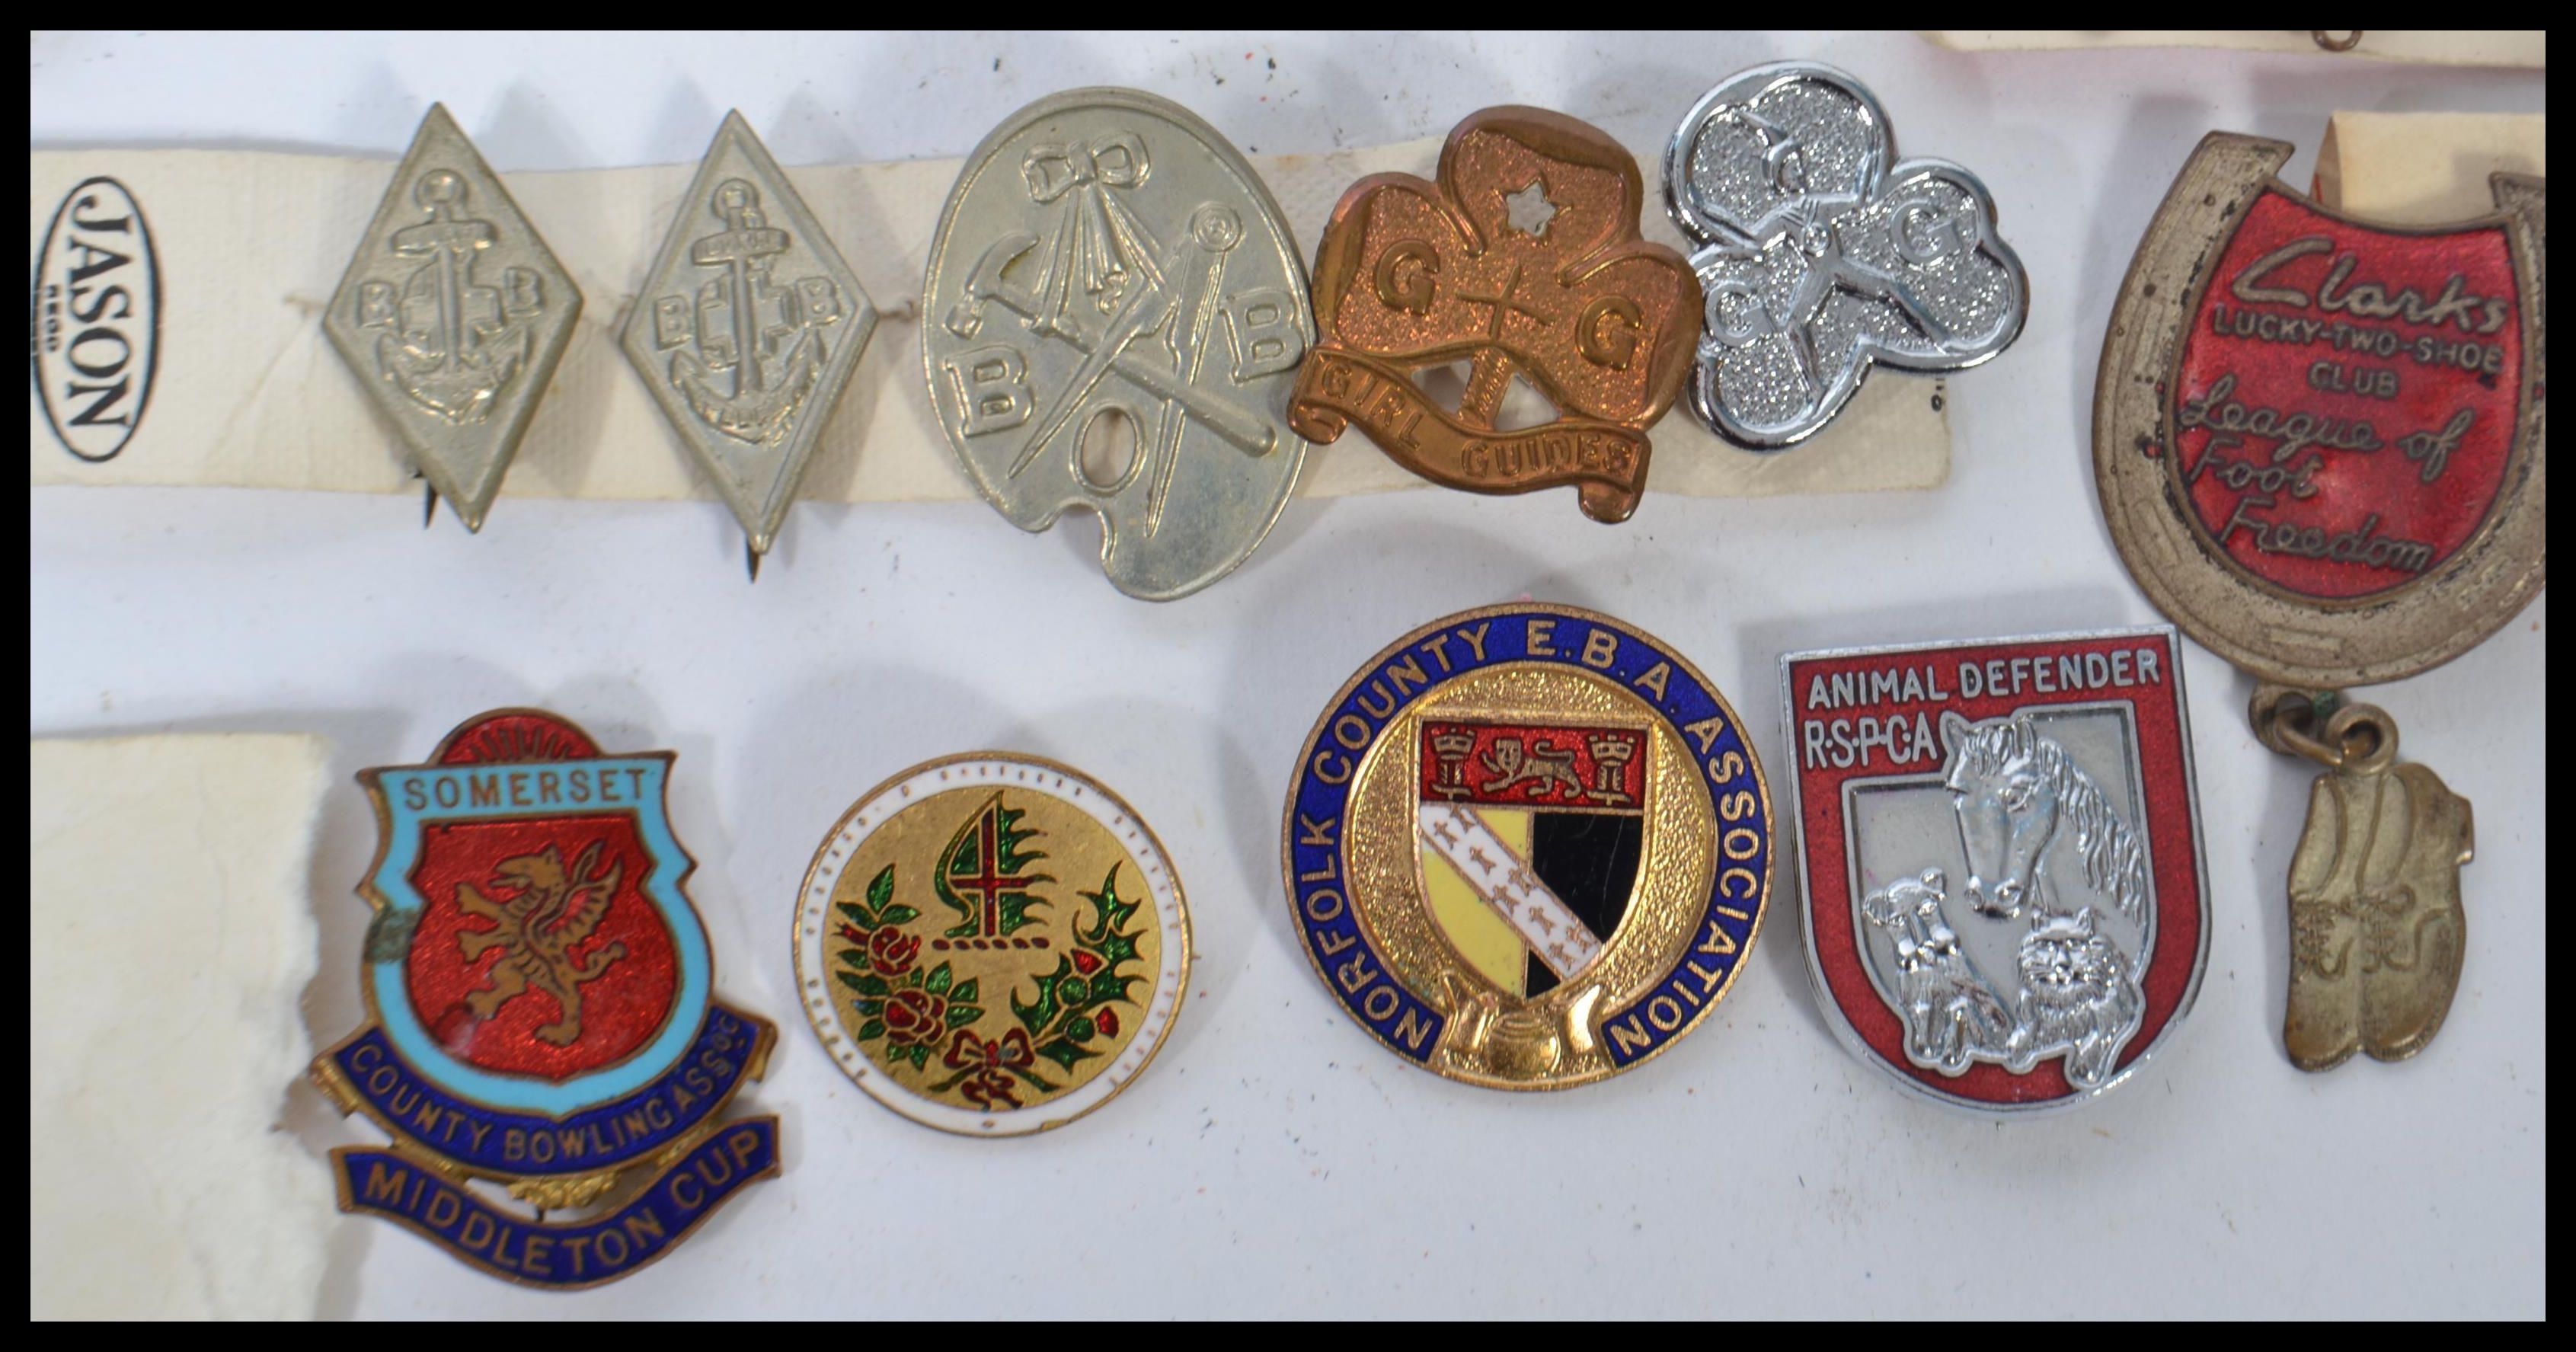 A good collection of vintage Enamel pin badges dating from the first half of the 20th century to - Image 3 of 10